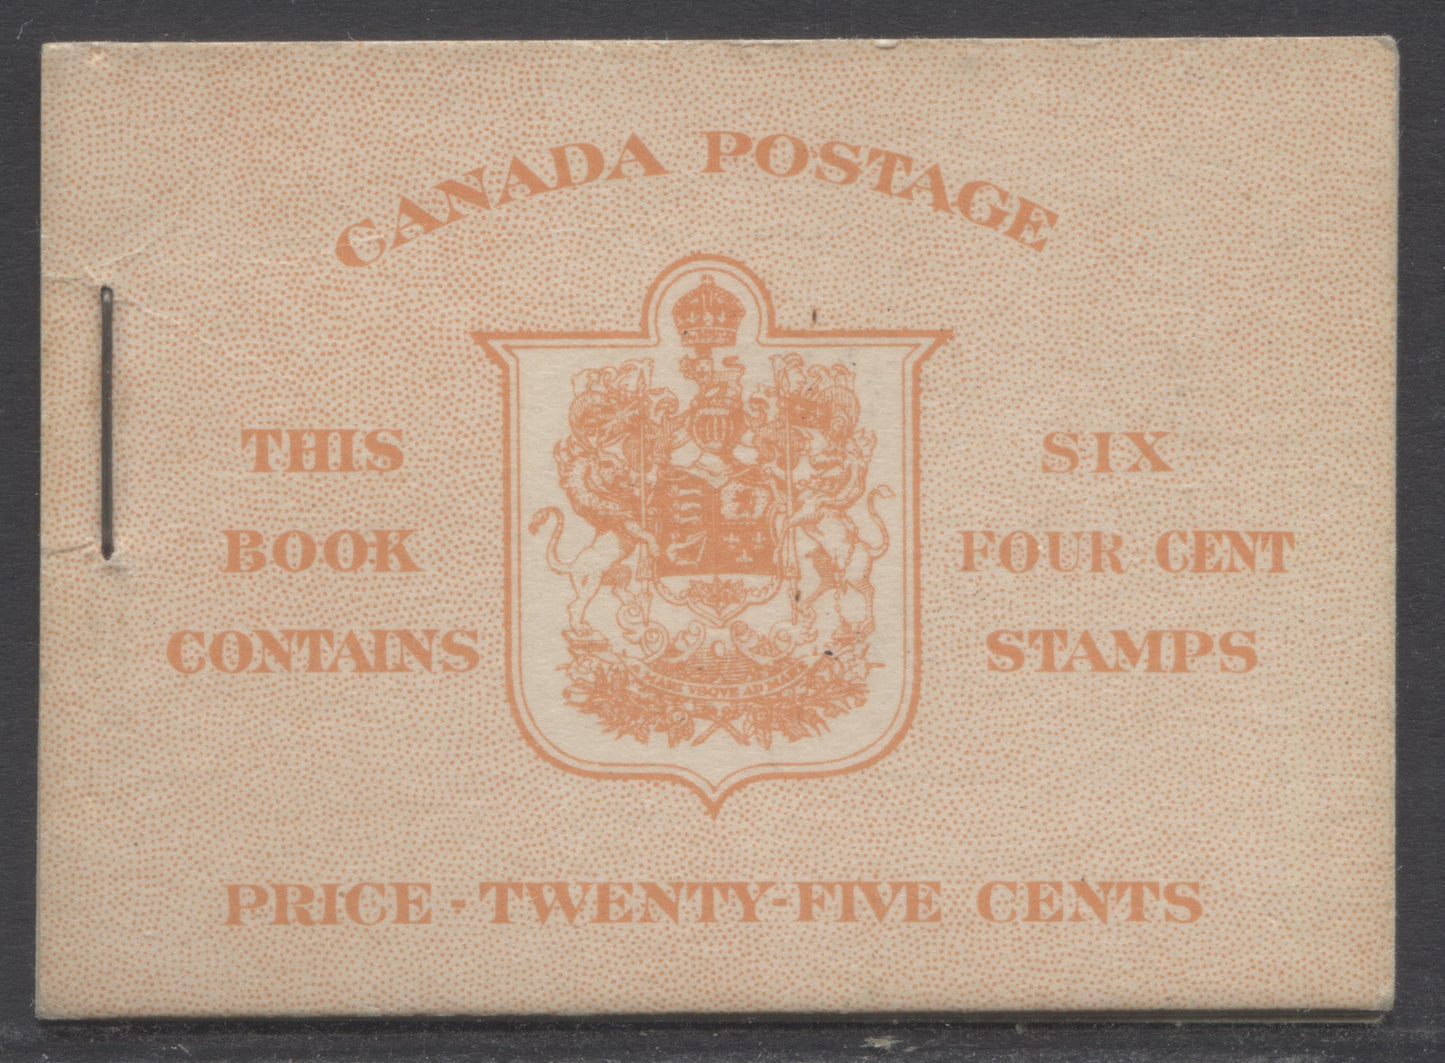 Lot 99 Canada #BK36cEvar 1942-1947 War Issue, A Complete 25c English Booklet, A Pane Of 6 4c Dark Carmine, Front Cover IIi, Type IA, Surcharged 7c & 6c Rate Page, 14mm Staple, 24,114,000 Issued, Unlisted in Unitrade and McCann